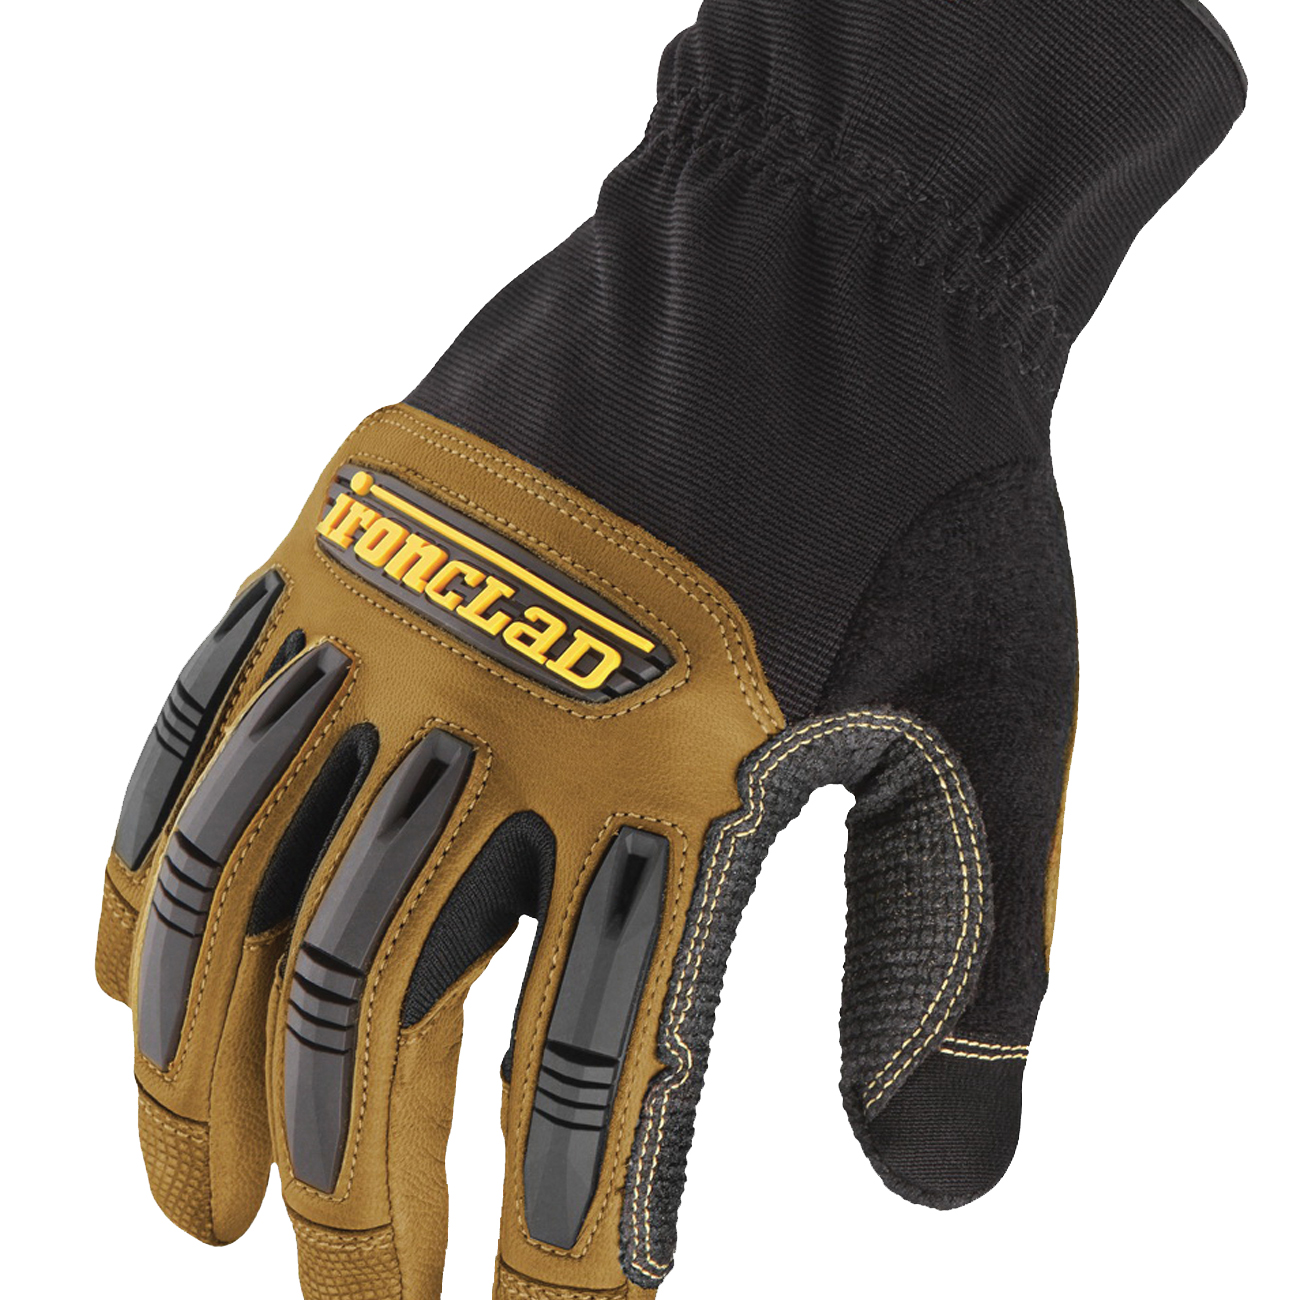 Ironclad RANCHWORX RWG2-05-XL Gloves, XL, 9-1/2 in L, Wing Thumb, Open Cuff, Leather, Black/Tan - 1